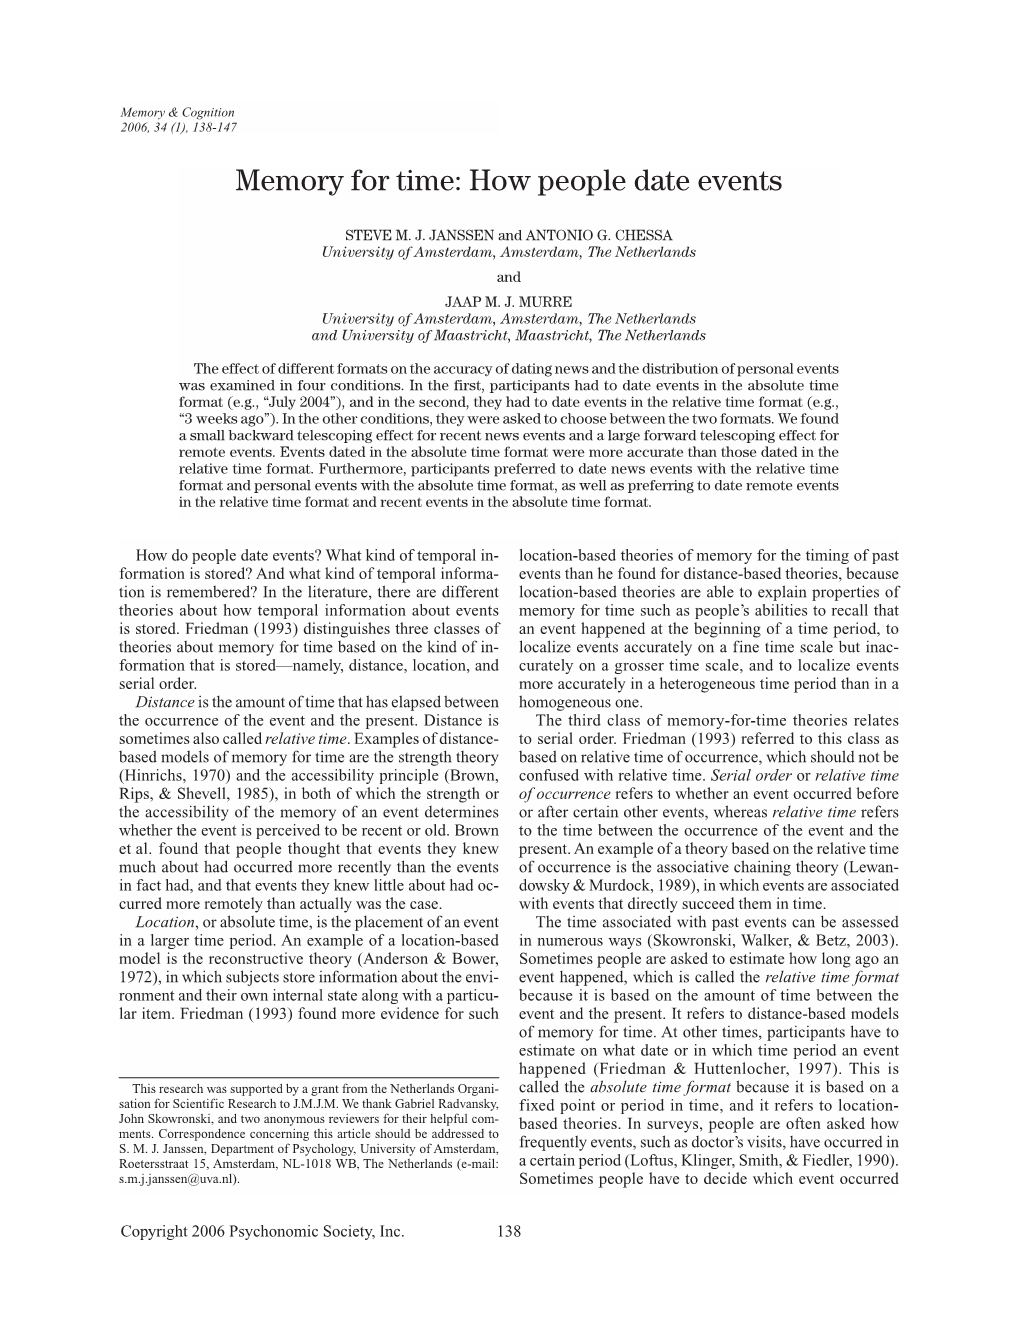 Memory for Time: How People Date Events